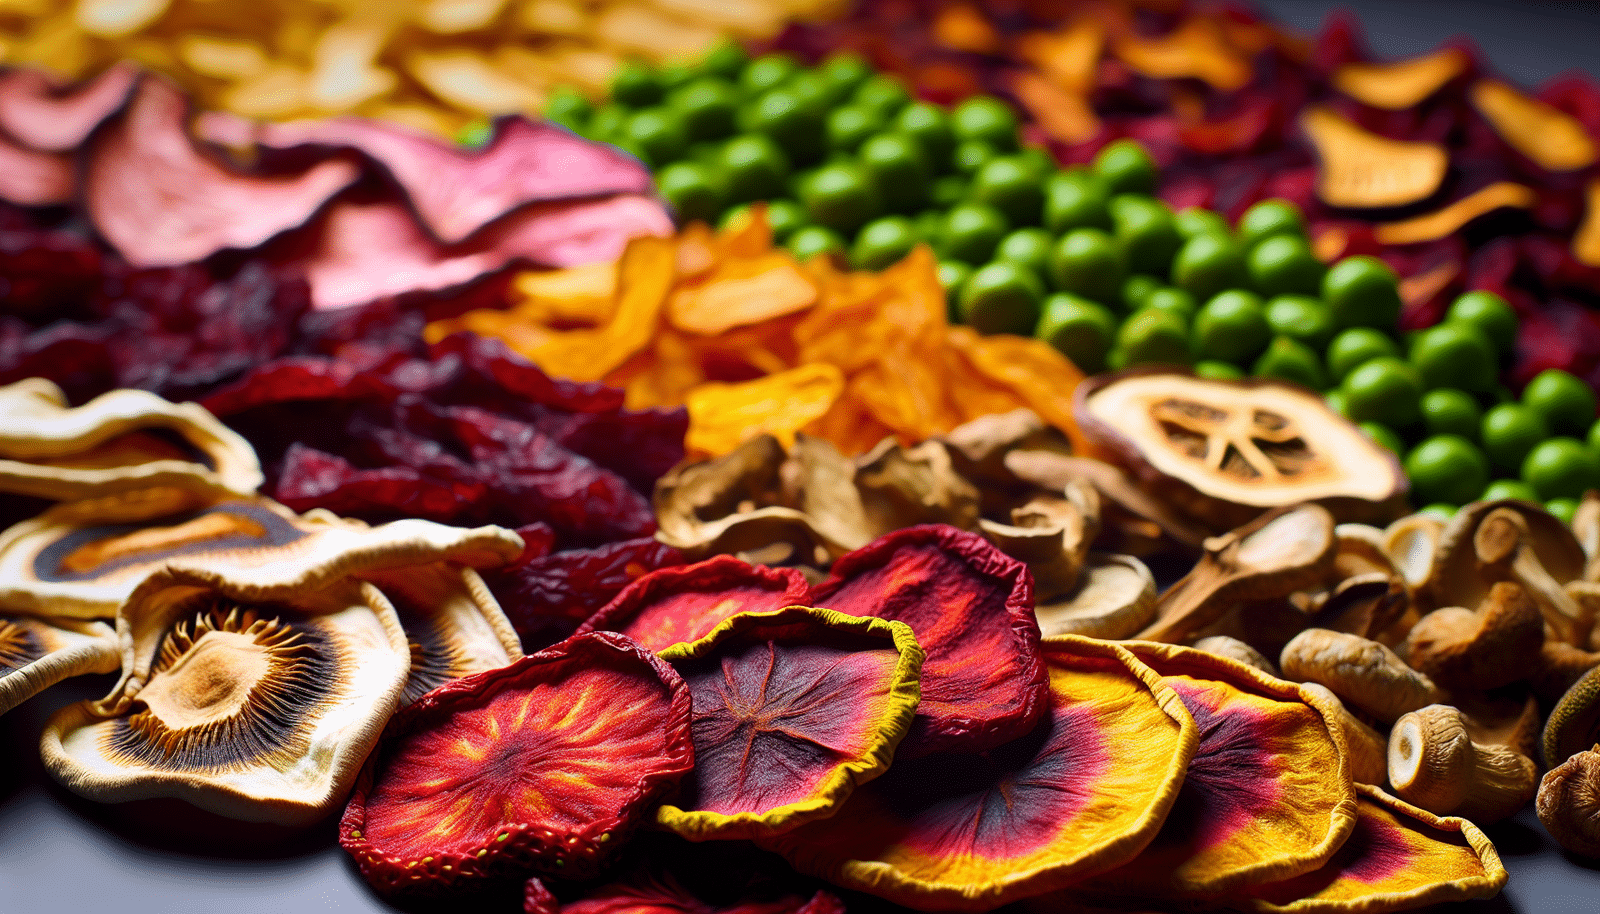 Variety of dehydrated fruits and vegetables